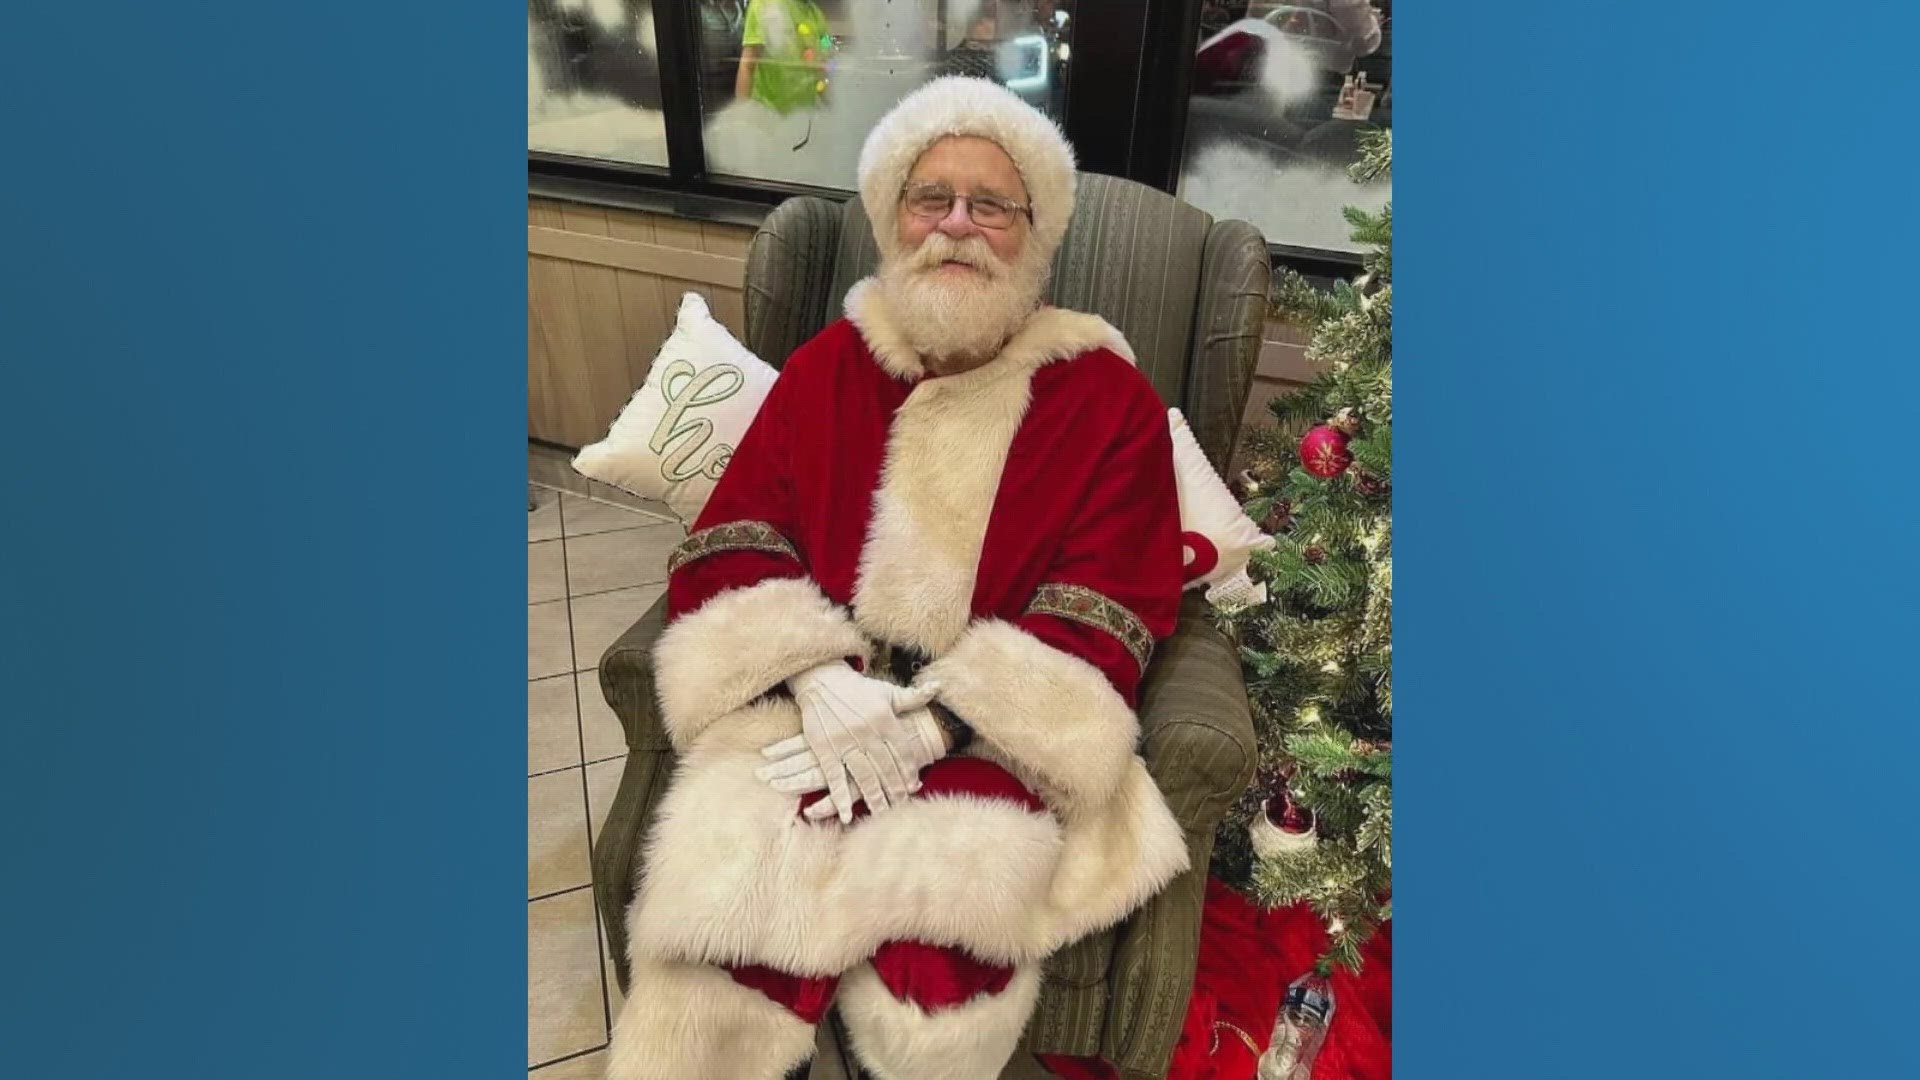 C.J. Sowell has played Santa for the Copperas Cove community for years. Now, residents are being asked to send him letters about how he has impacted their lives.